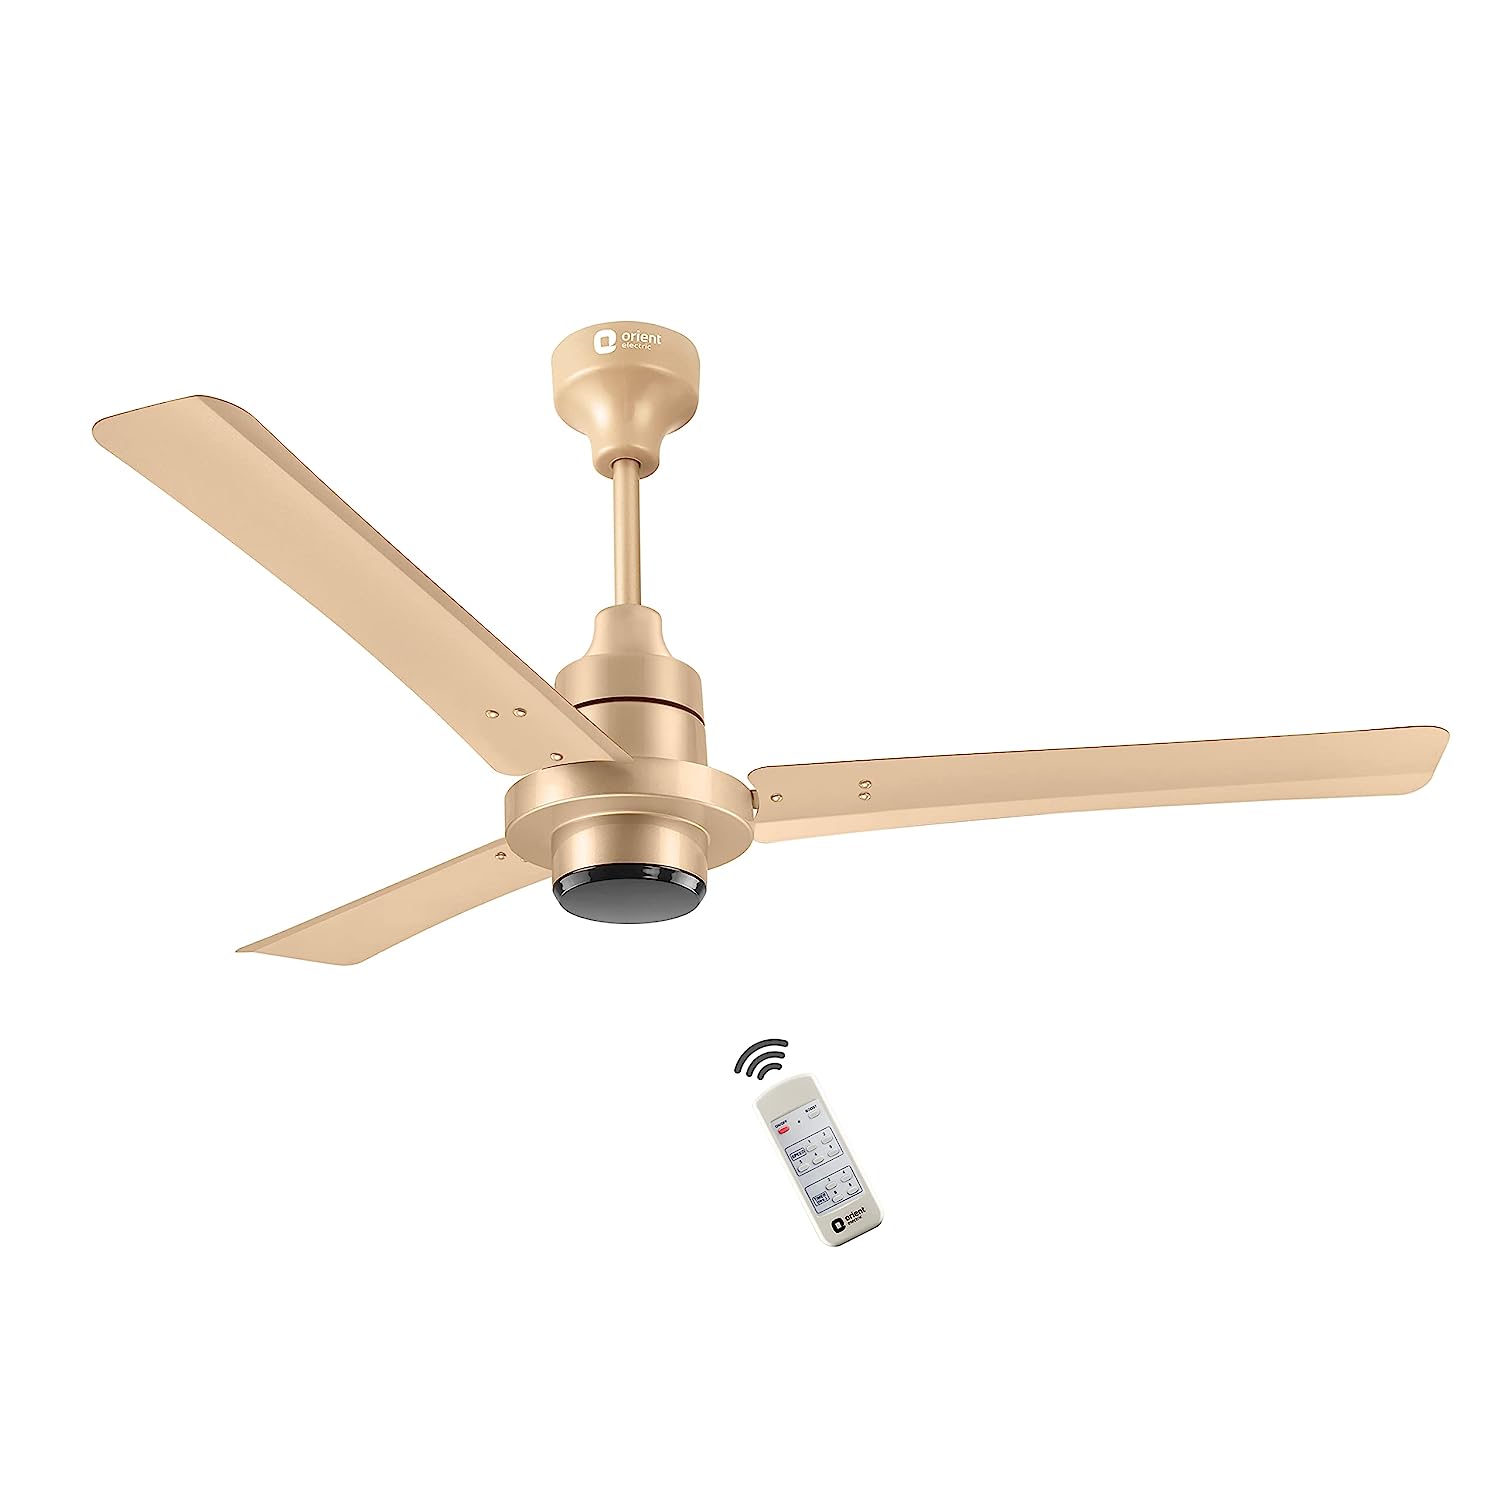 Electric I Tome 1200mm 26W Intelligent BLDC Energy Saving Ceiling Fan with Remote 3 Year On-Site Manufacturer's Warranty 5 Star Rated